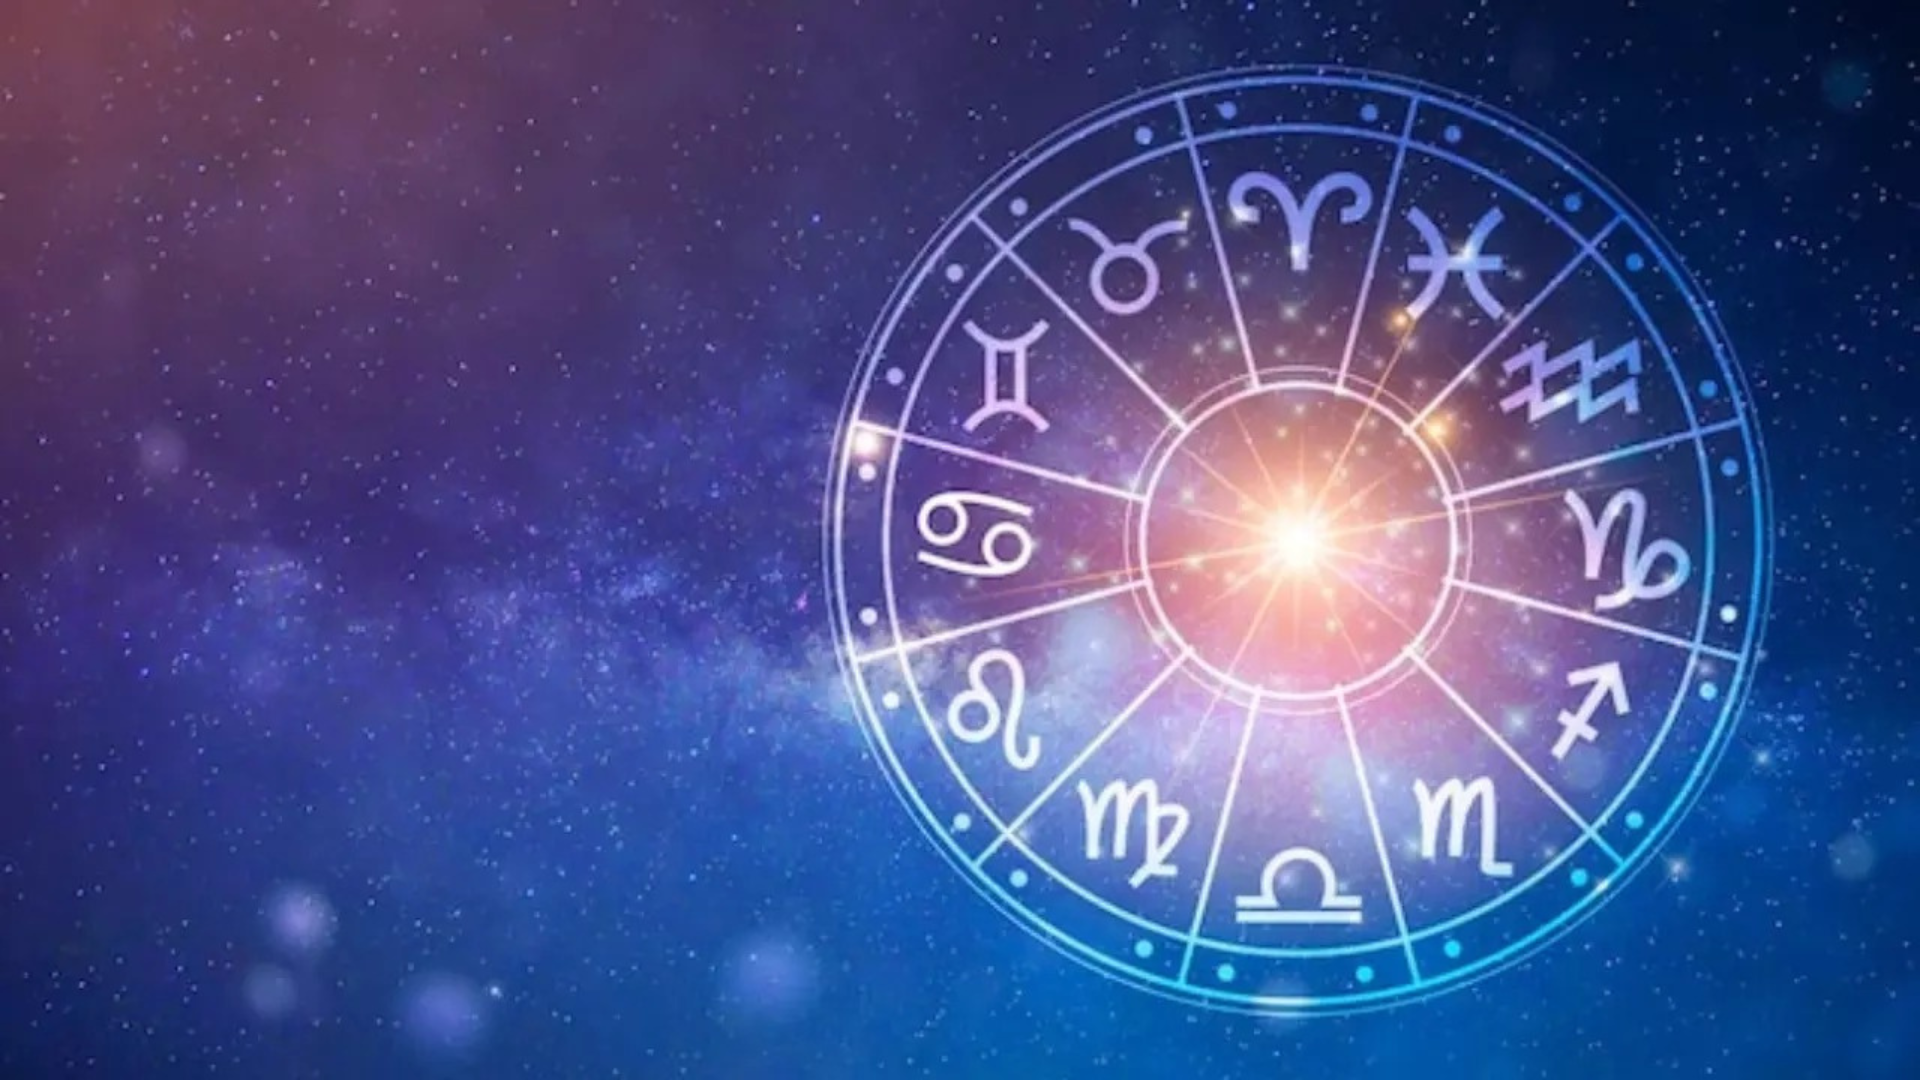 Astrological predictions